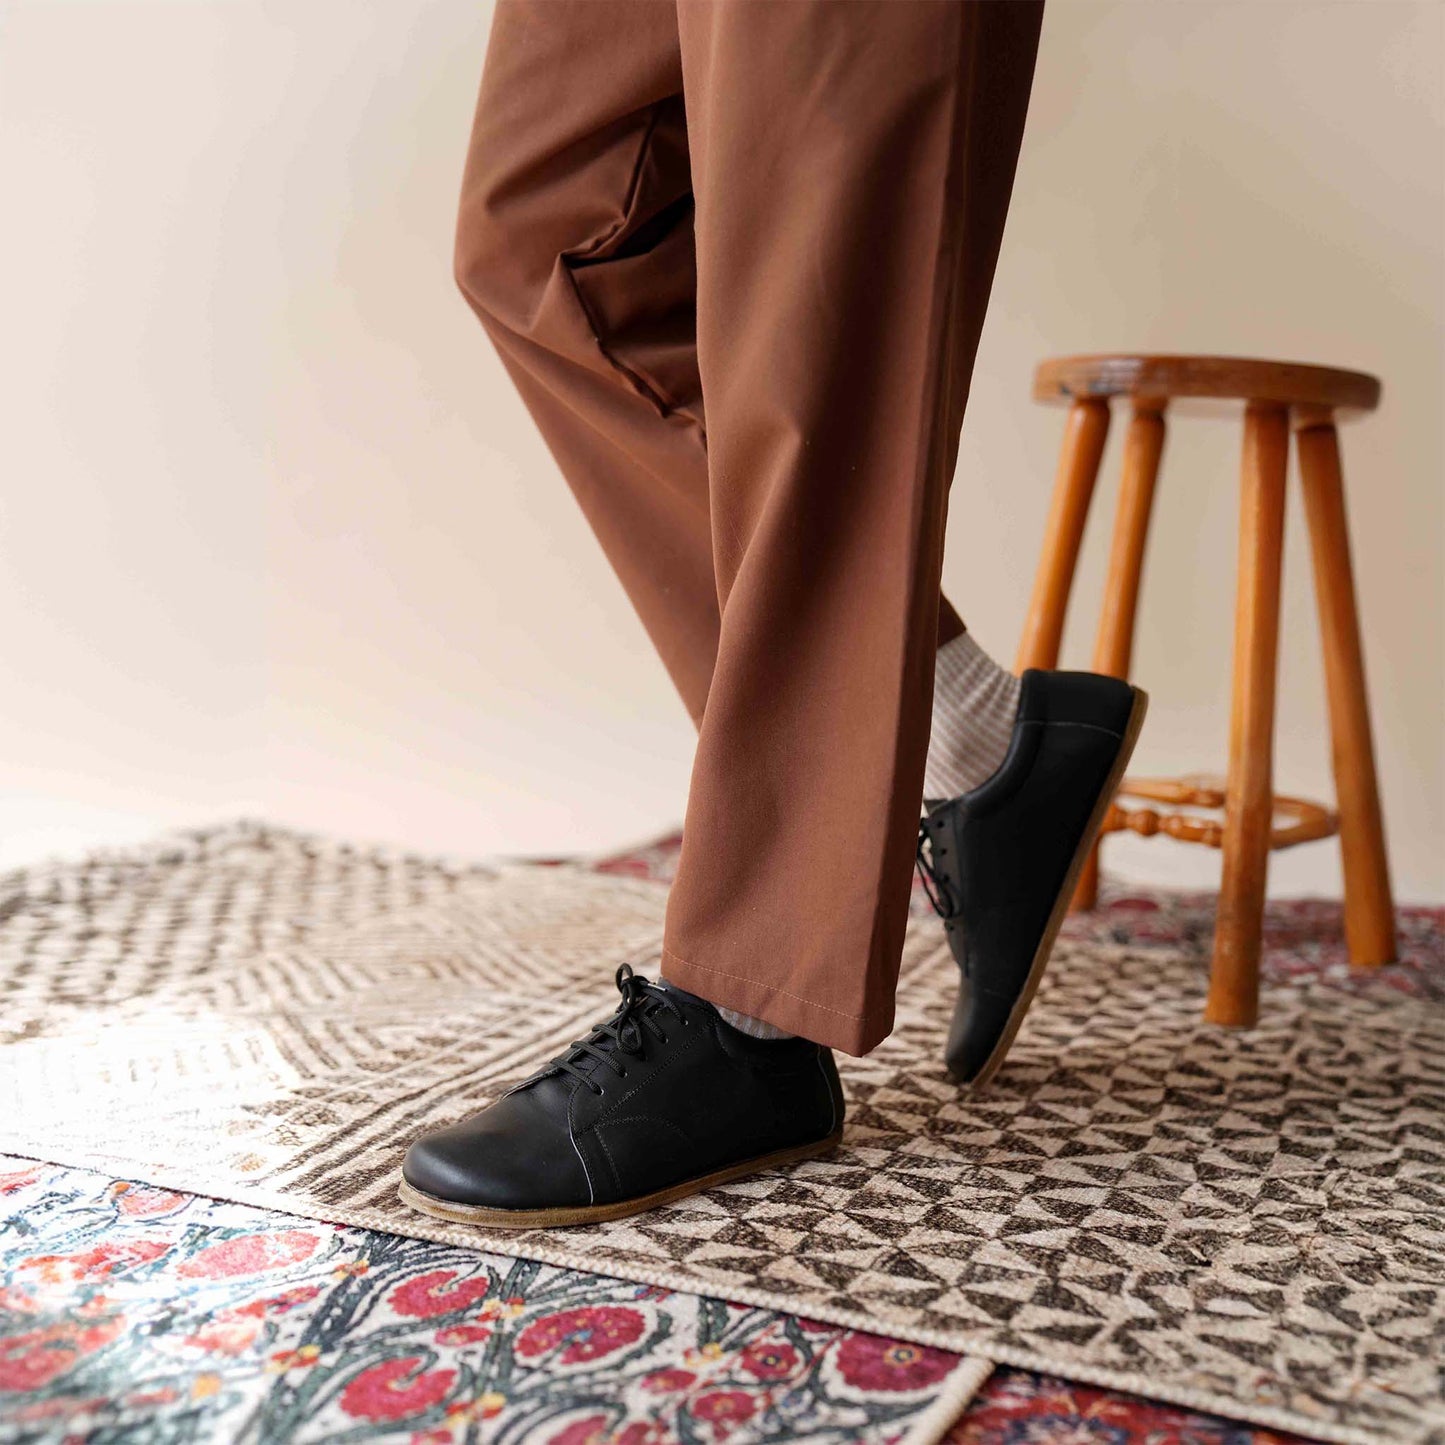 Close-up of a model's feet wearing Black Lydia Leather Barefoot Men's Sneakers, standing on a decorative rug.